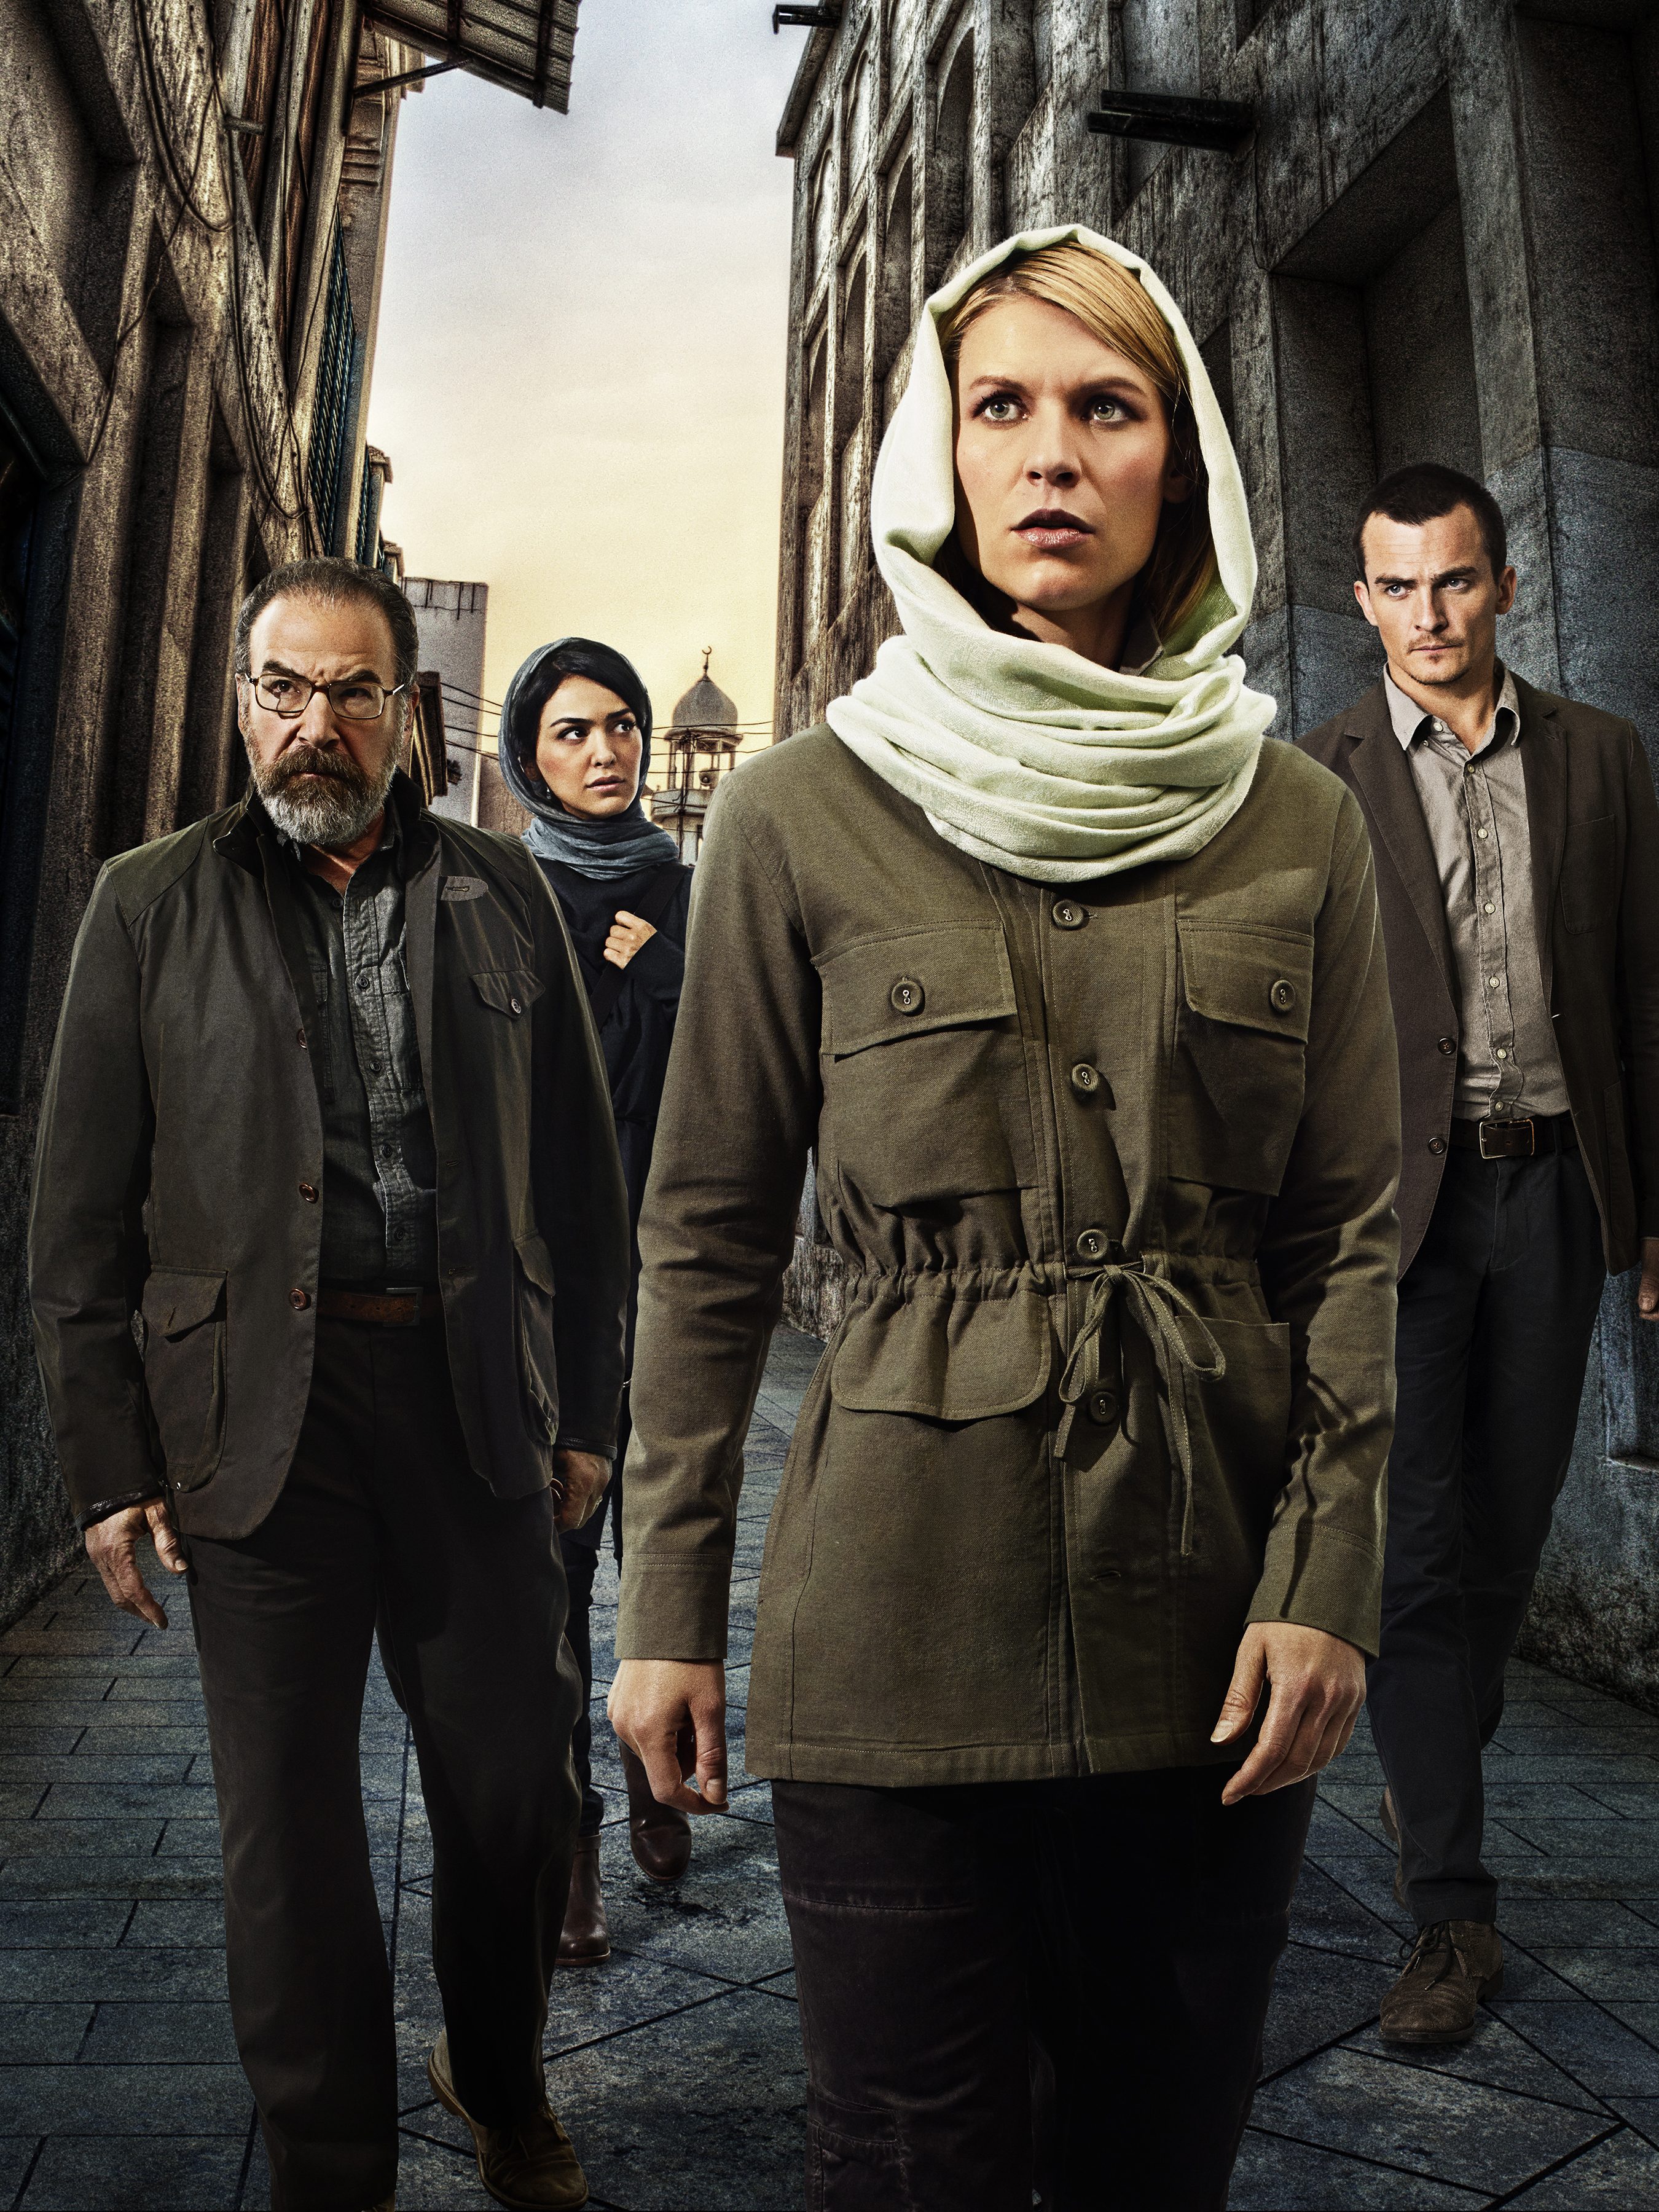 Claire Danes as Carrie Mathison in Homeland. (Jim Fiscus—Showtime)